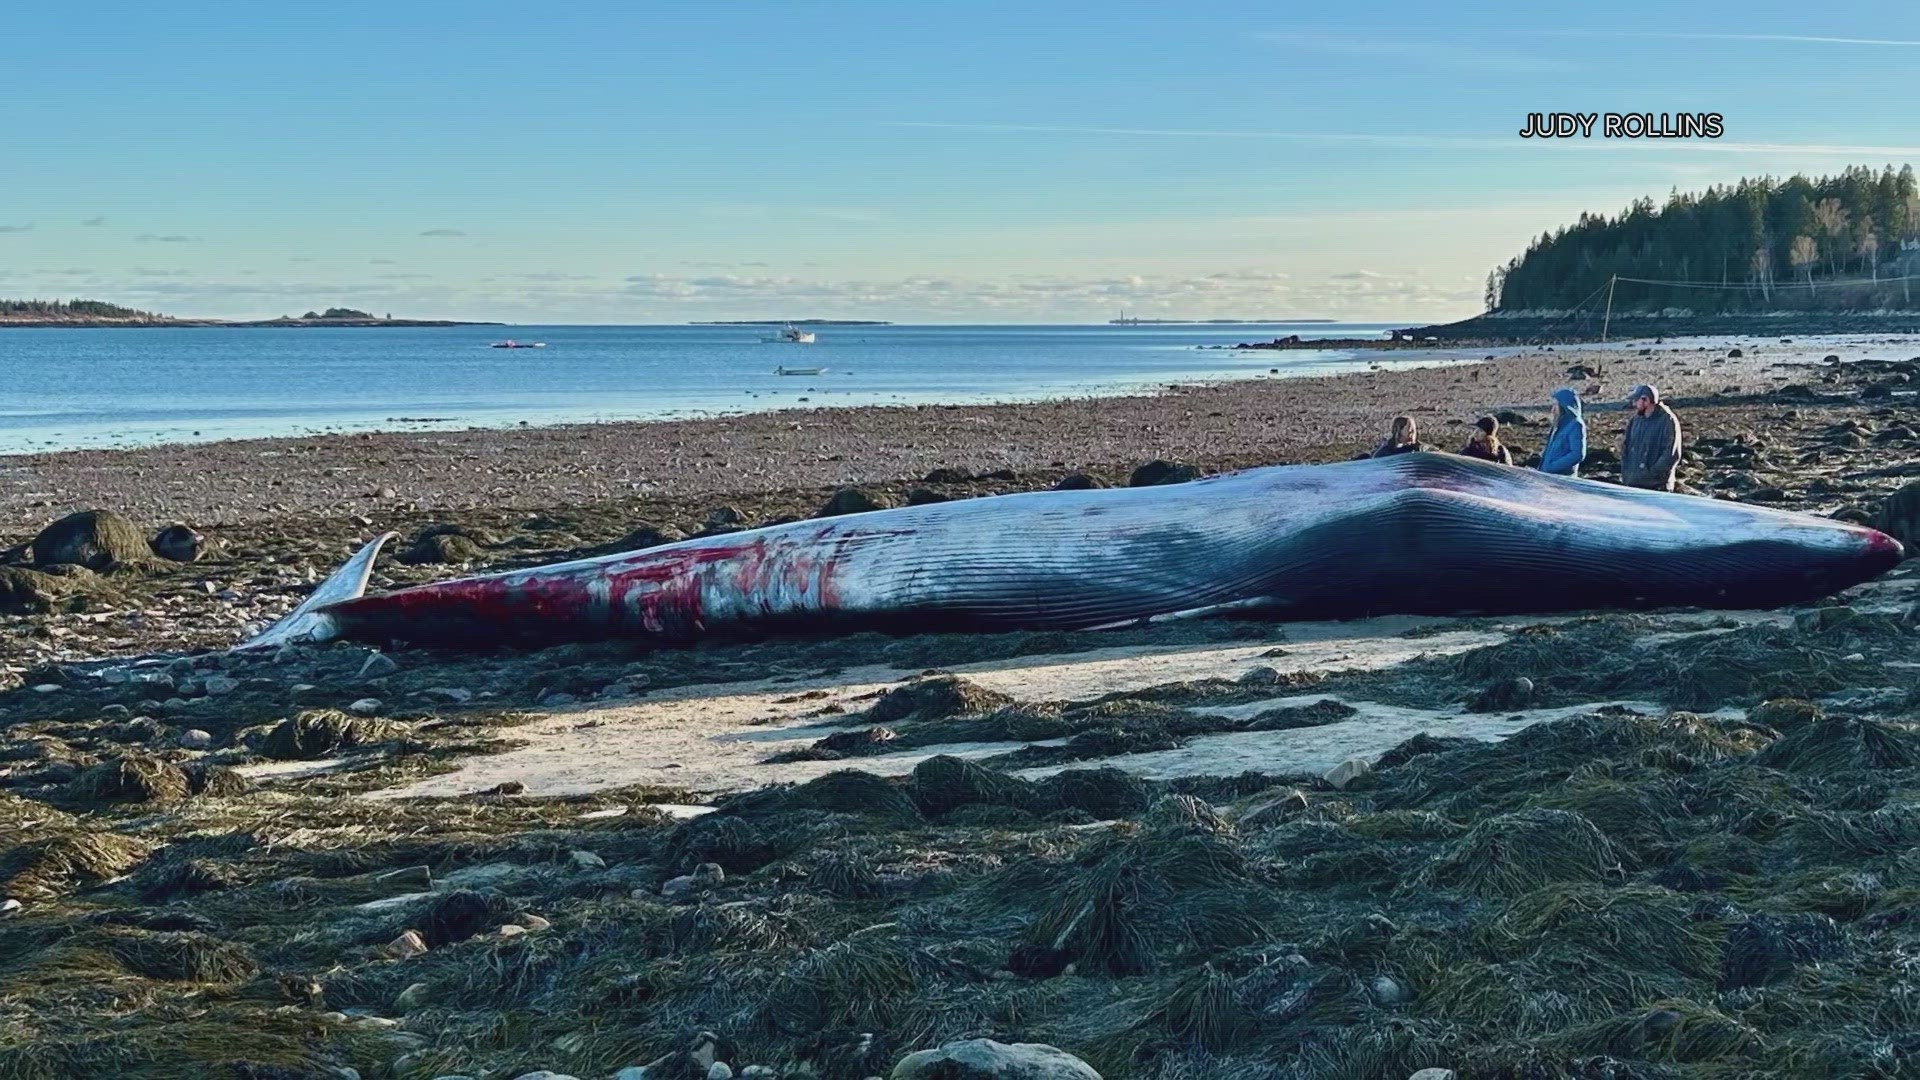 The whale showed no obvious signs of trauma or entanglement, Maine Marine Patrol spokesperson Jeff Nichols said.